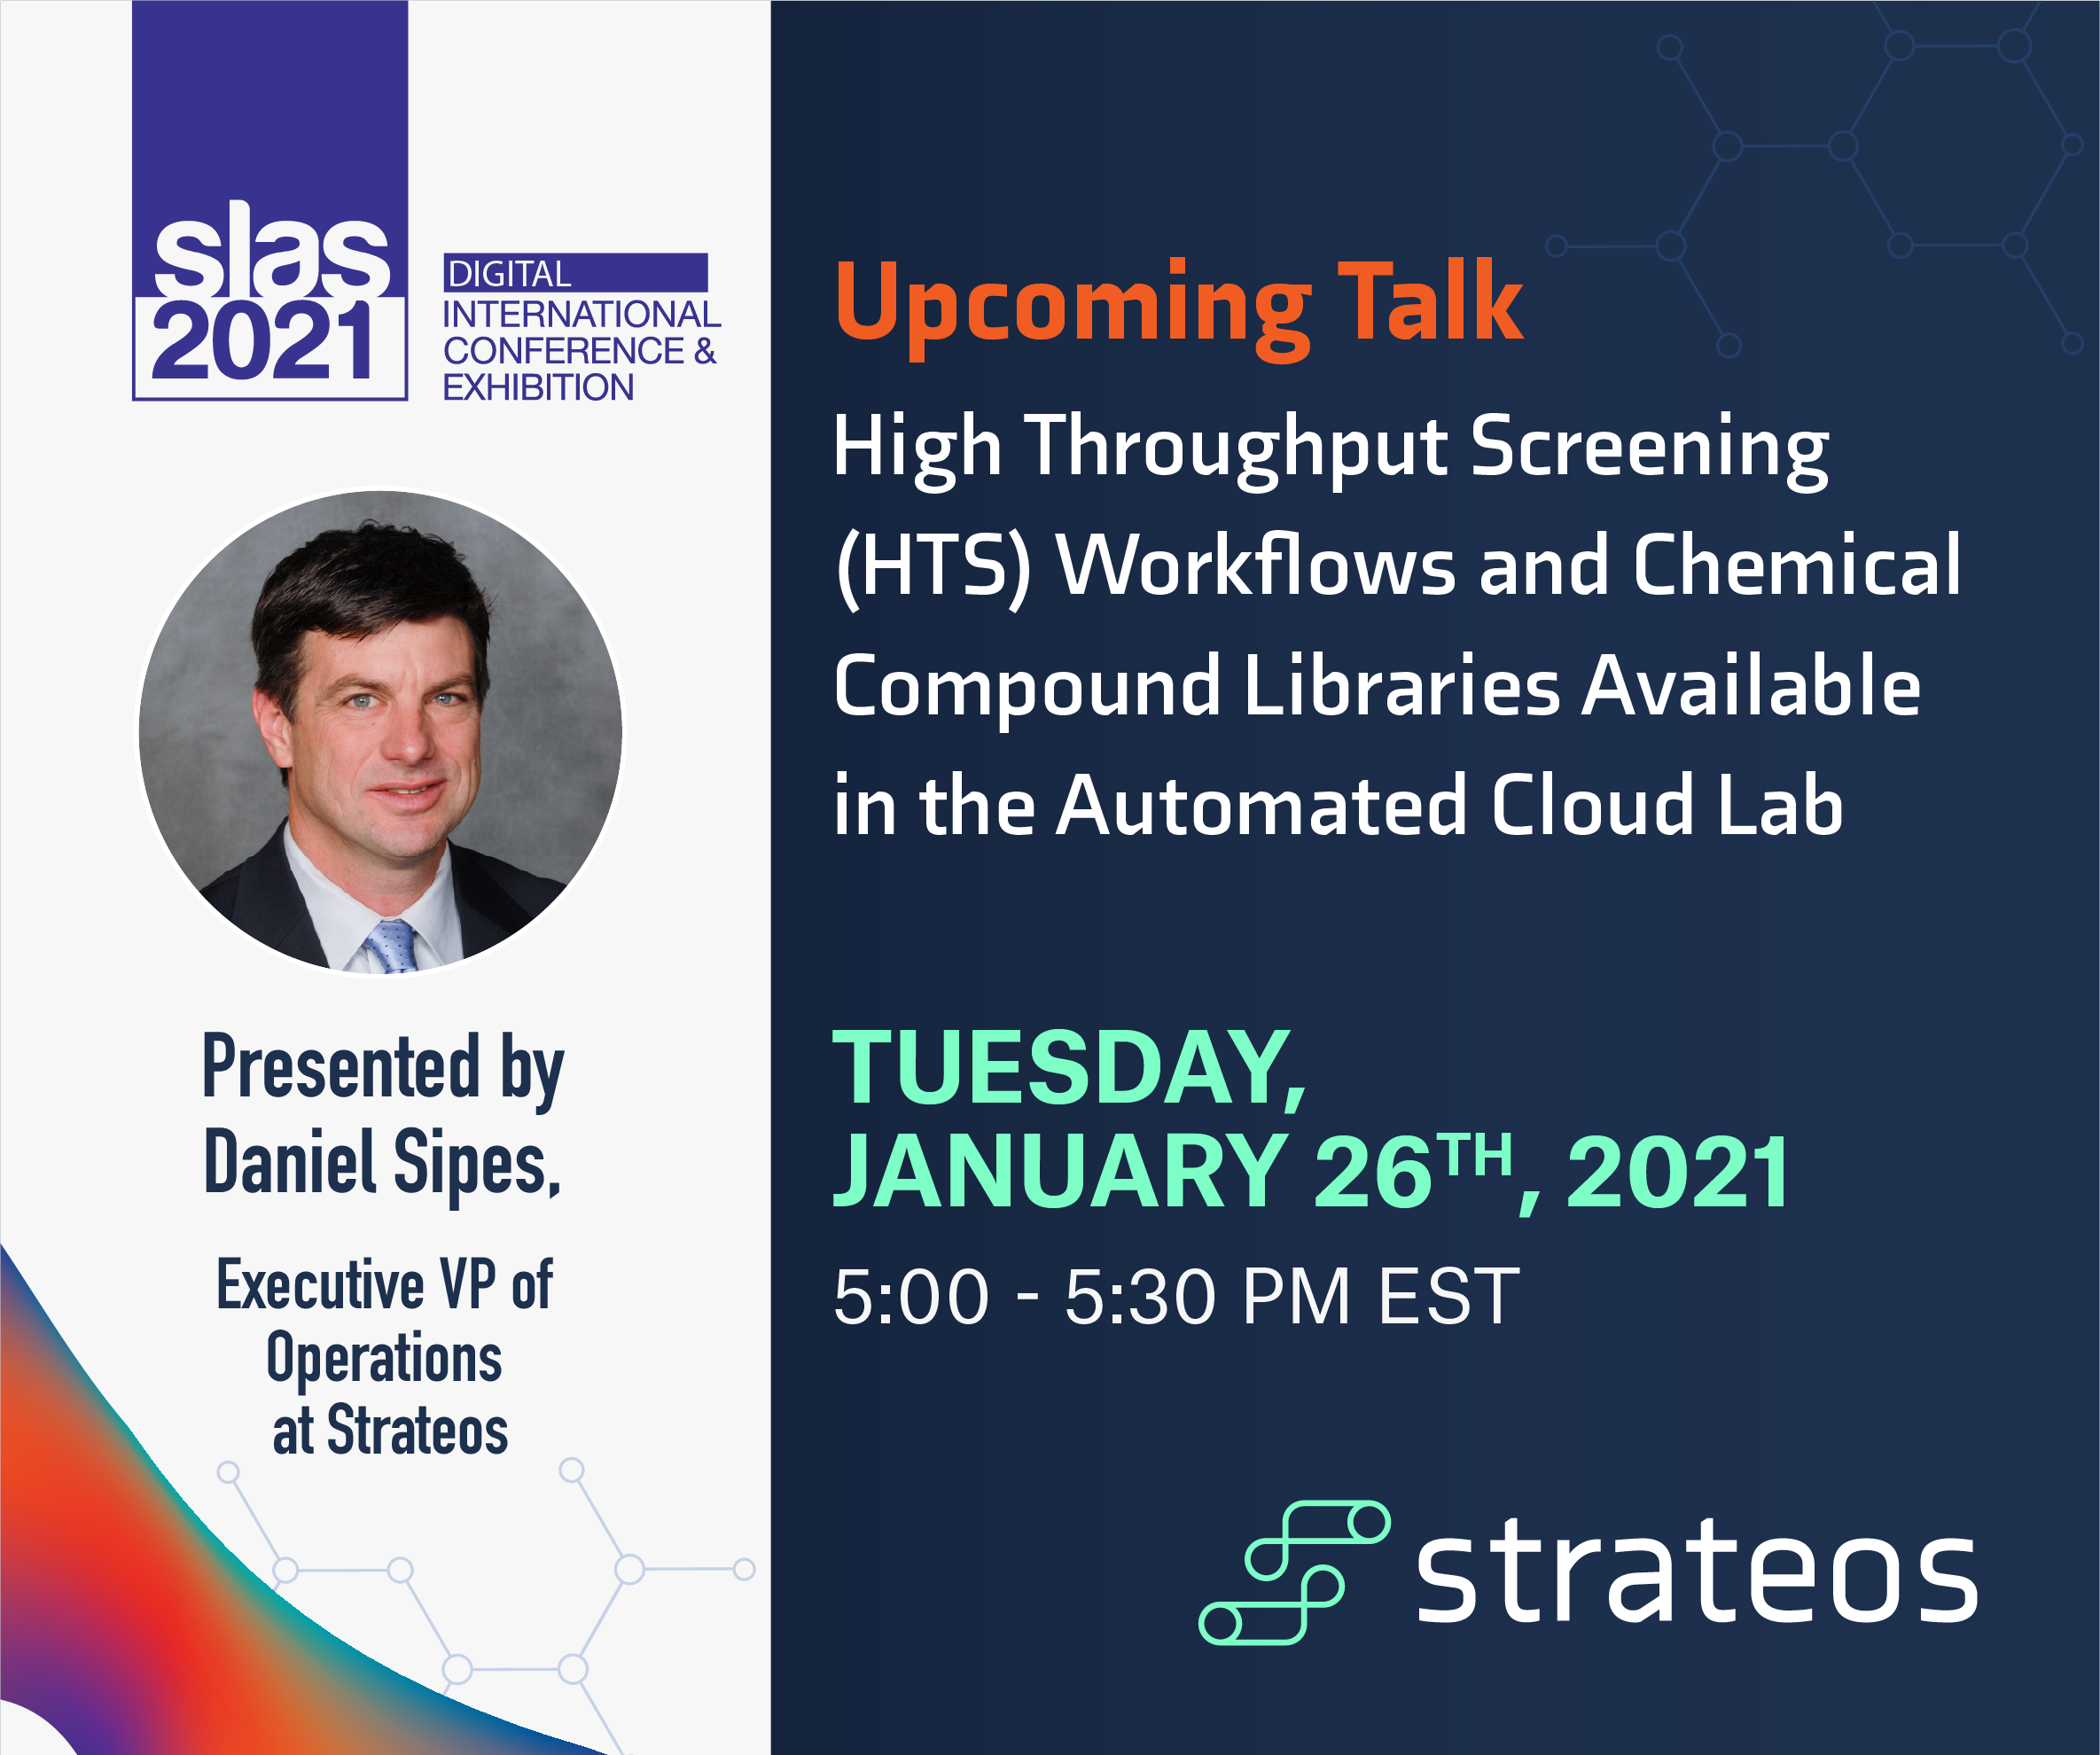 Announcing New High-Throughput Screening (HTS) Products and Services- A Preview of Our SLAS 2021 Talk